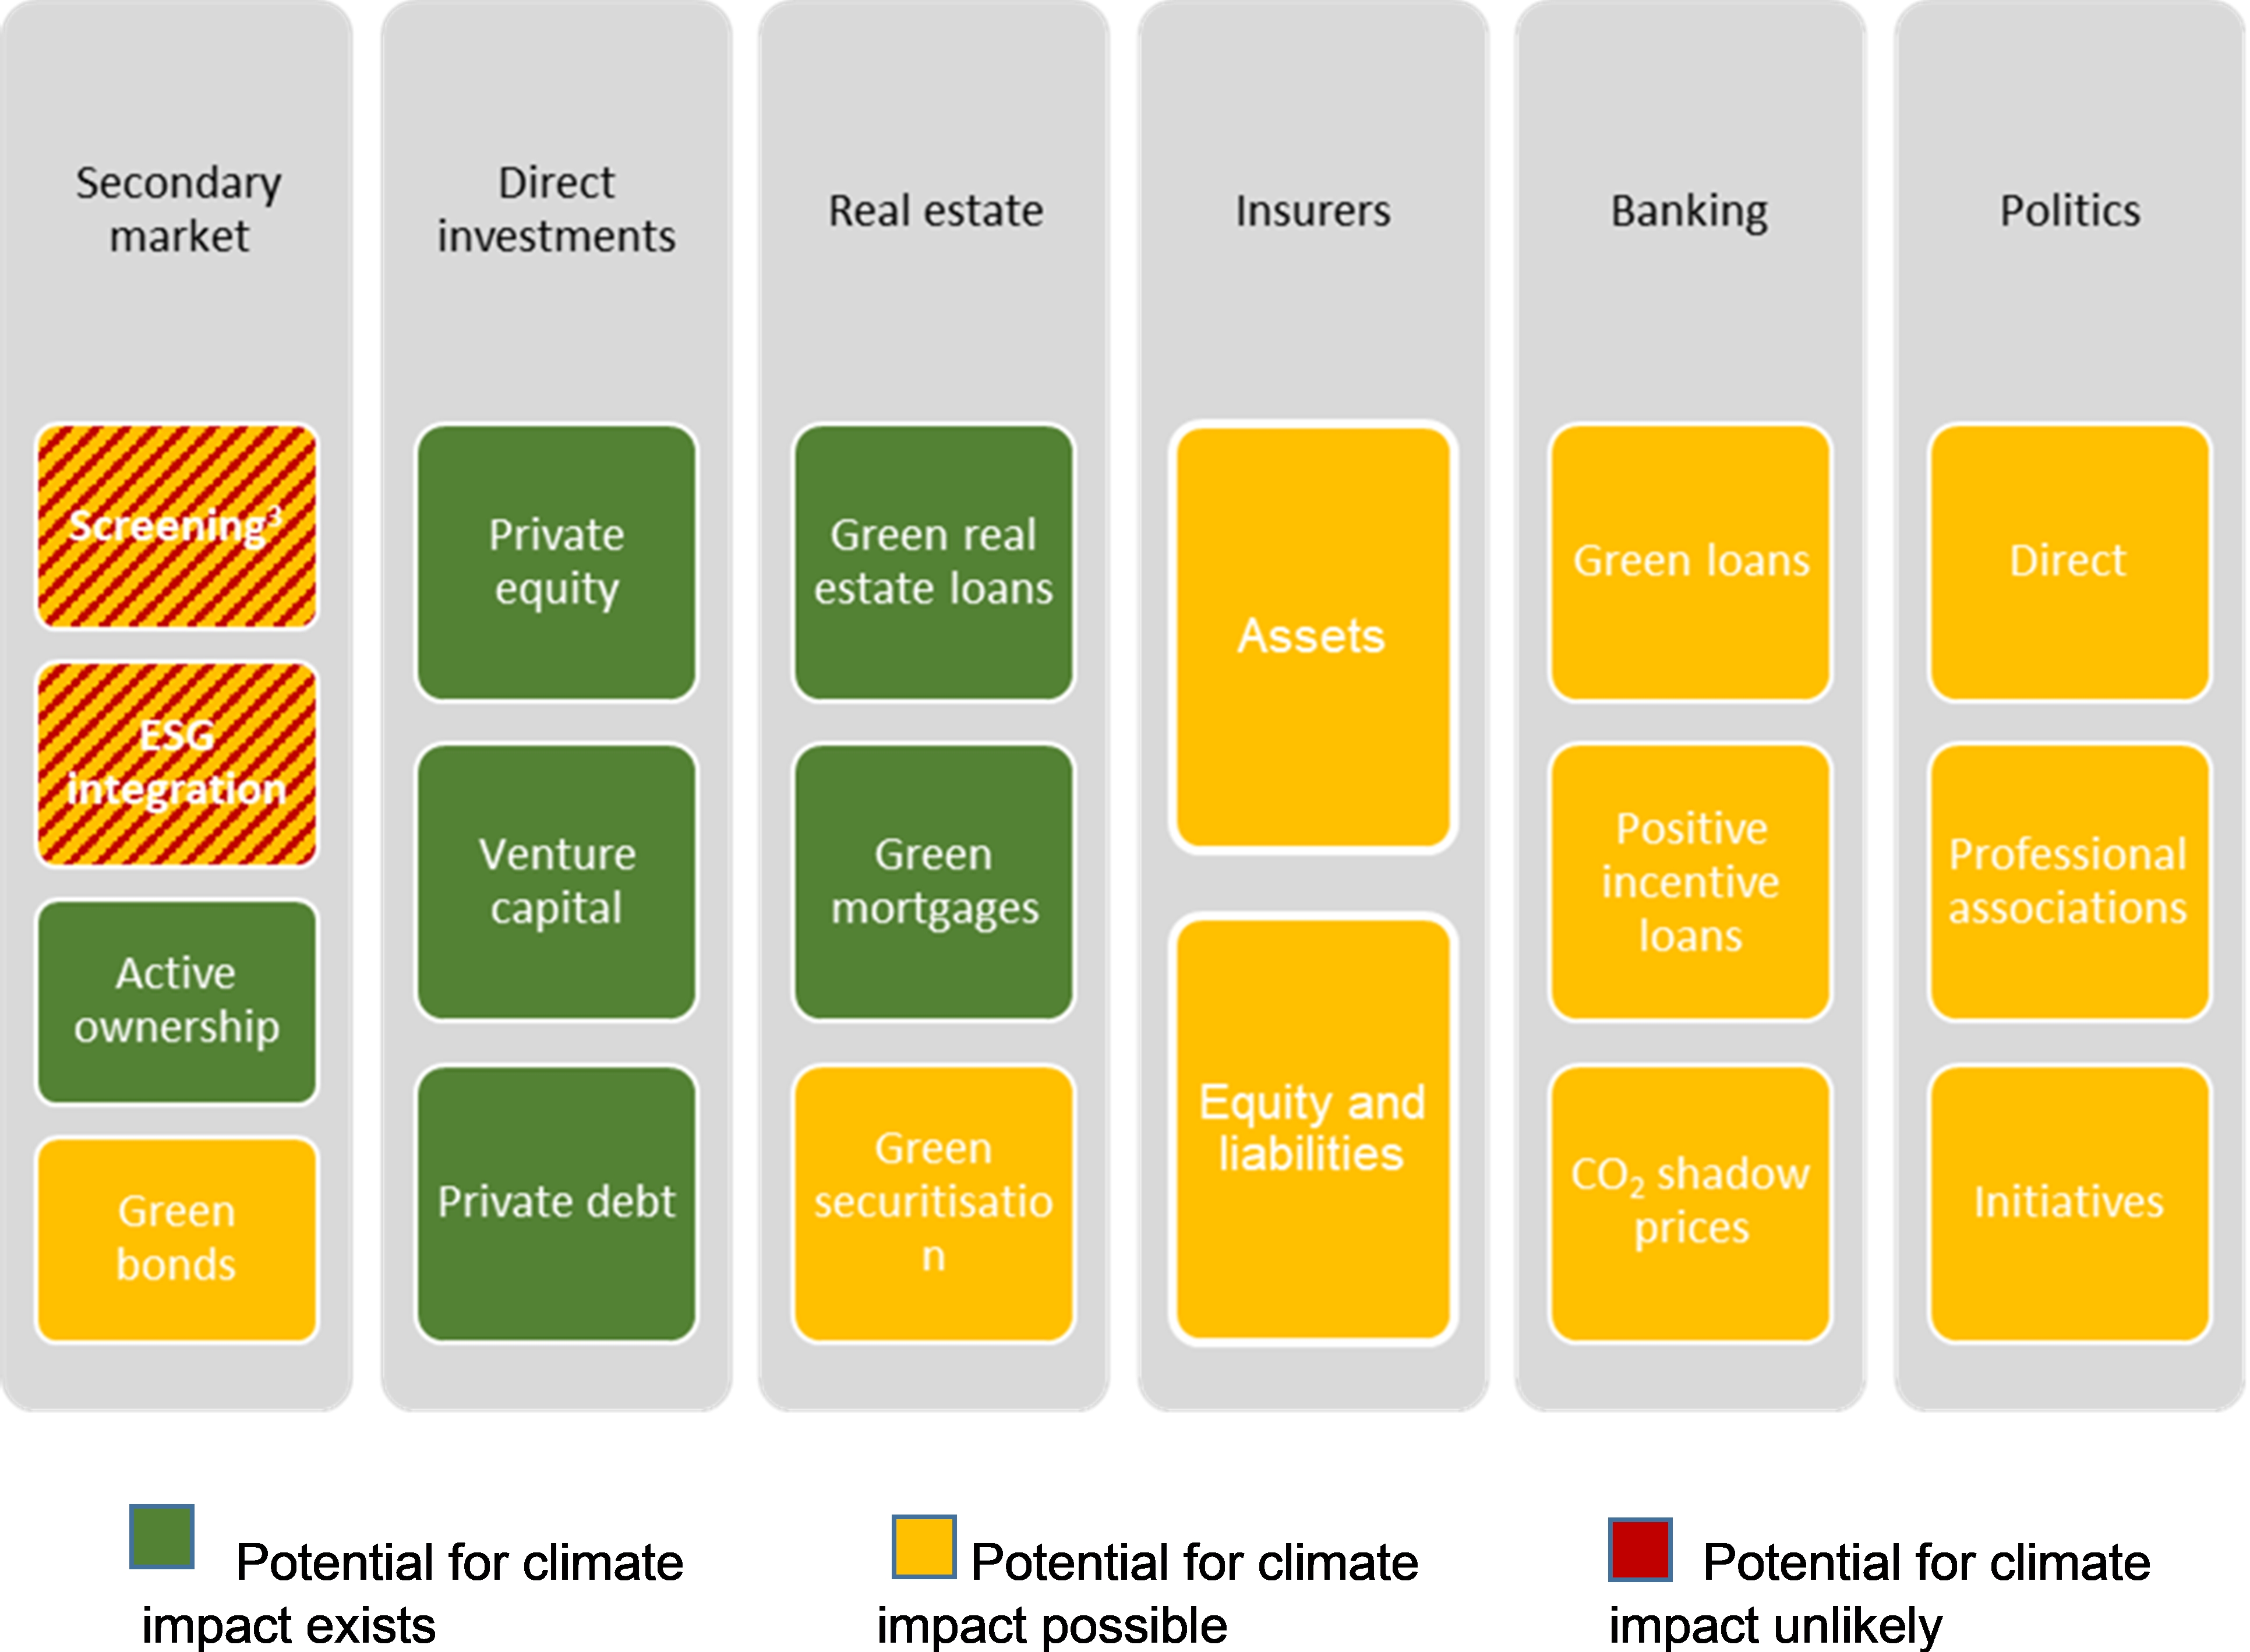 Overview of the current research regarding the climate impact of financial market actors’ actions